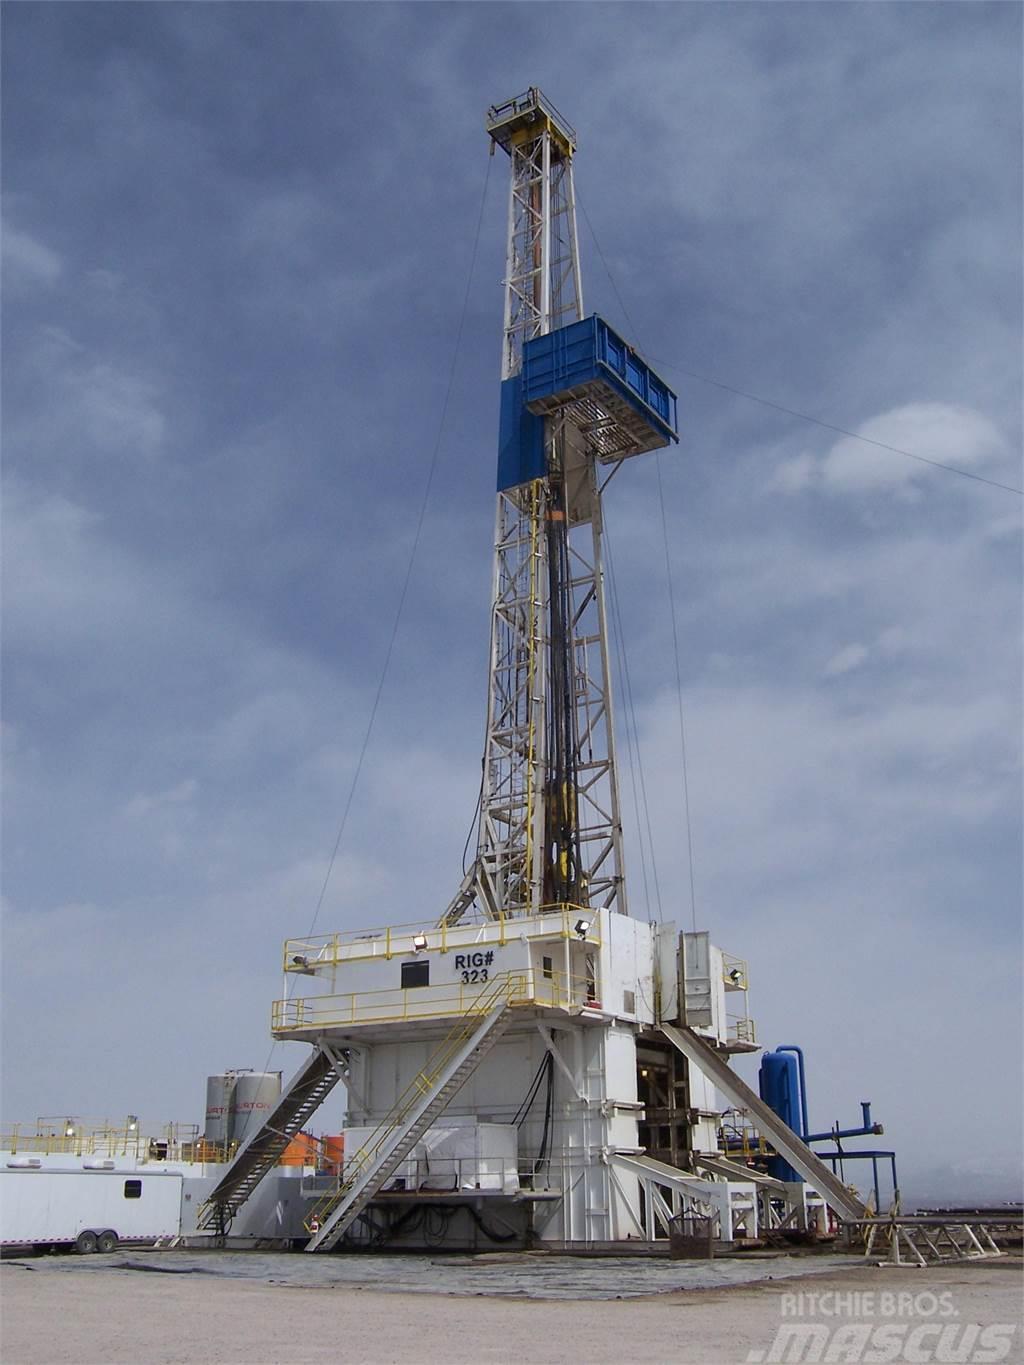 National 1320UE Complete Rig #323 Surface drill rigs